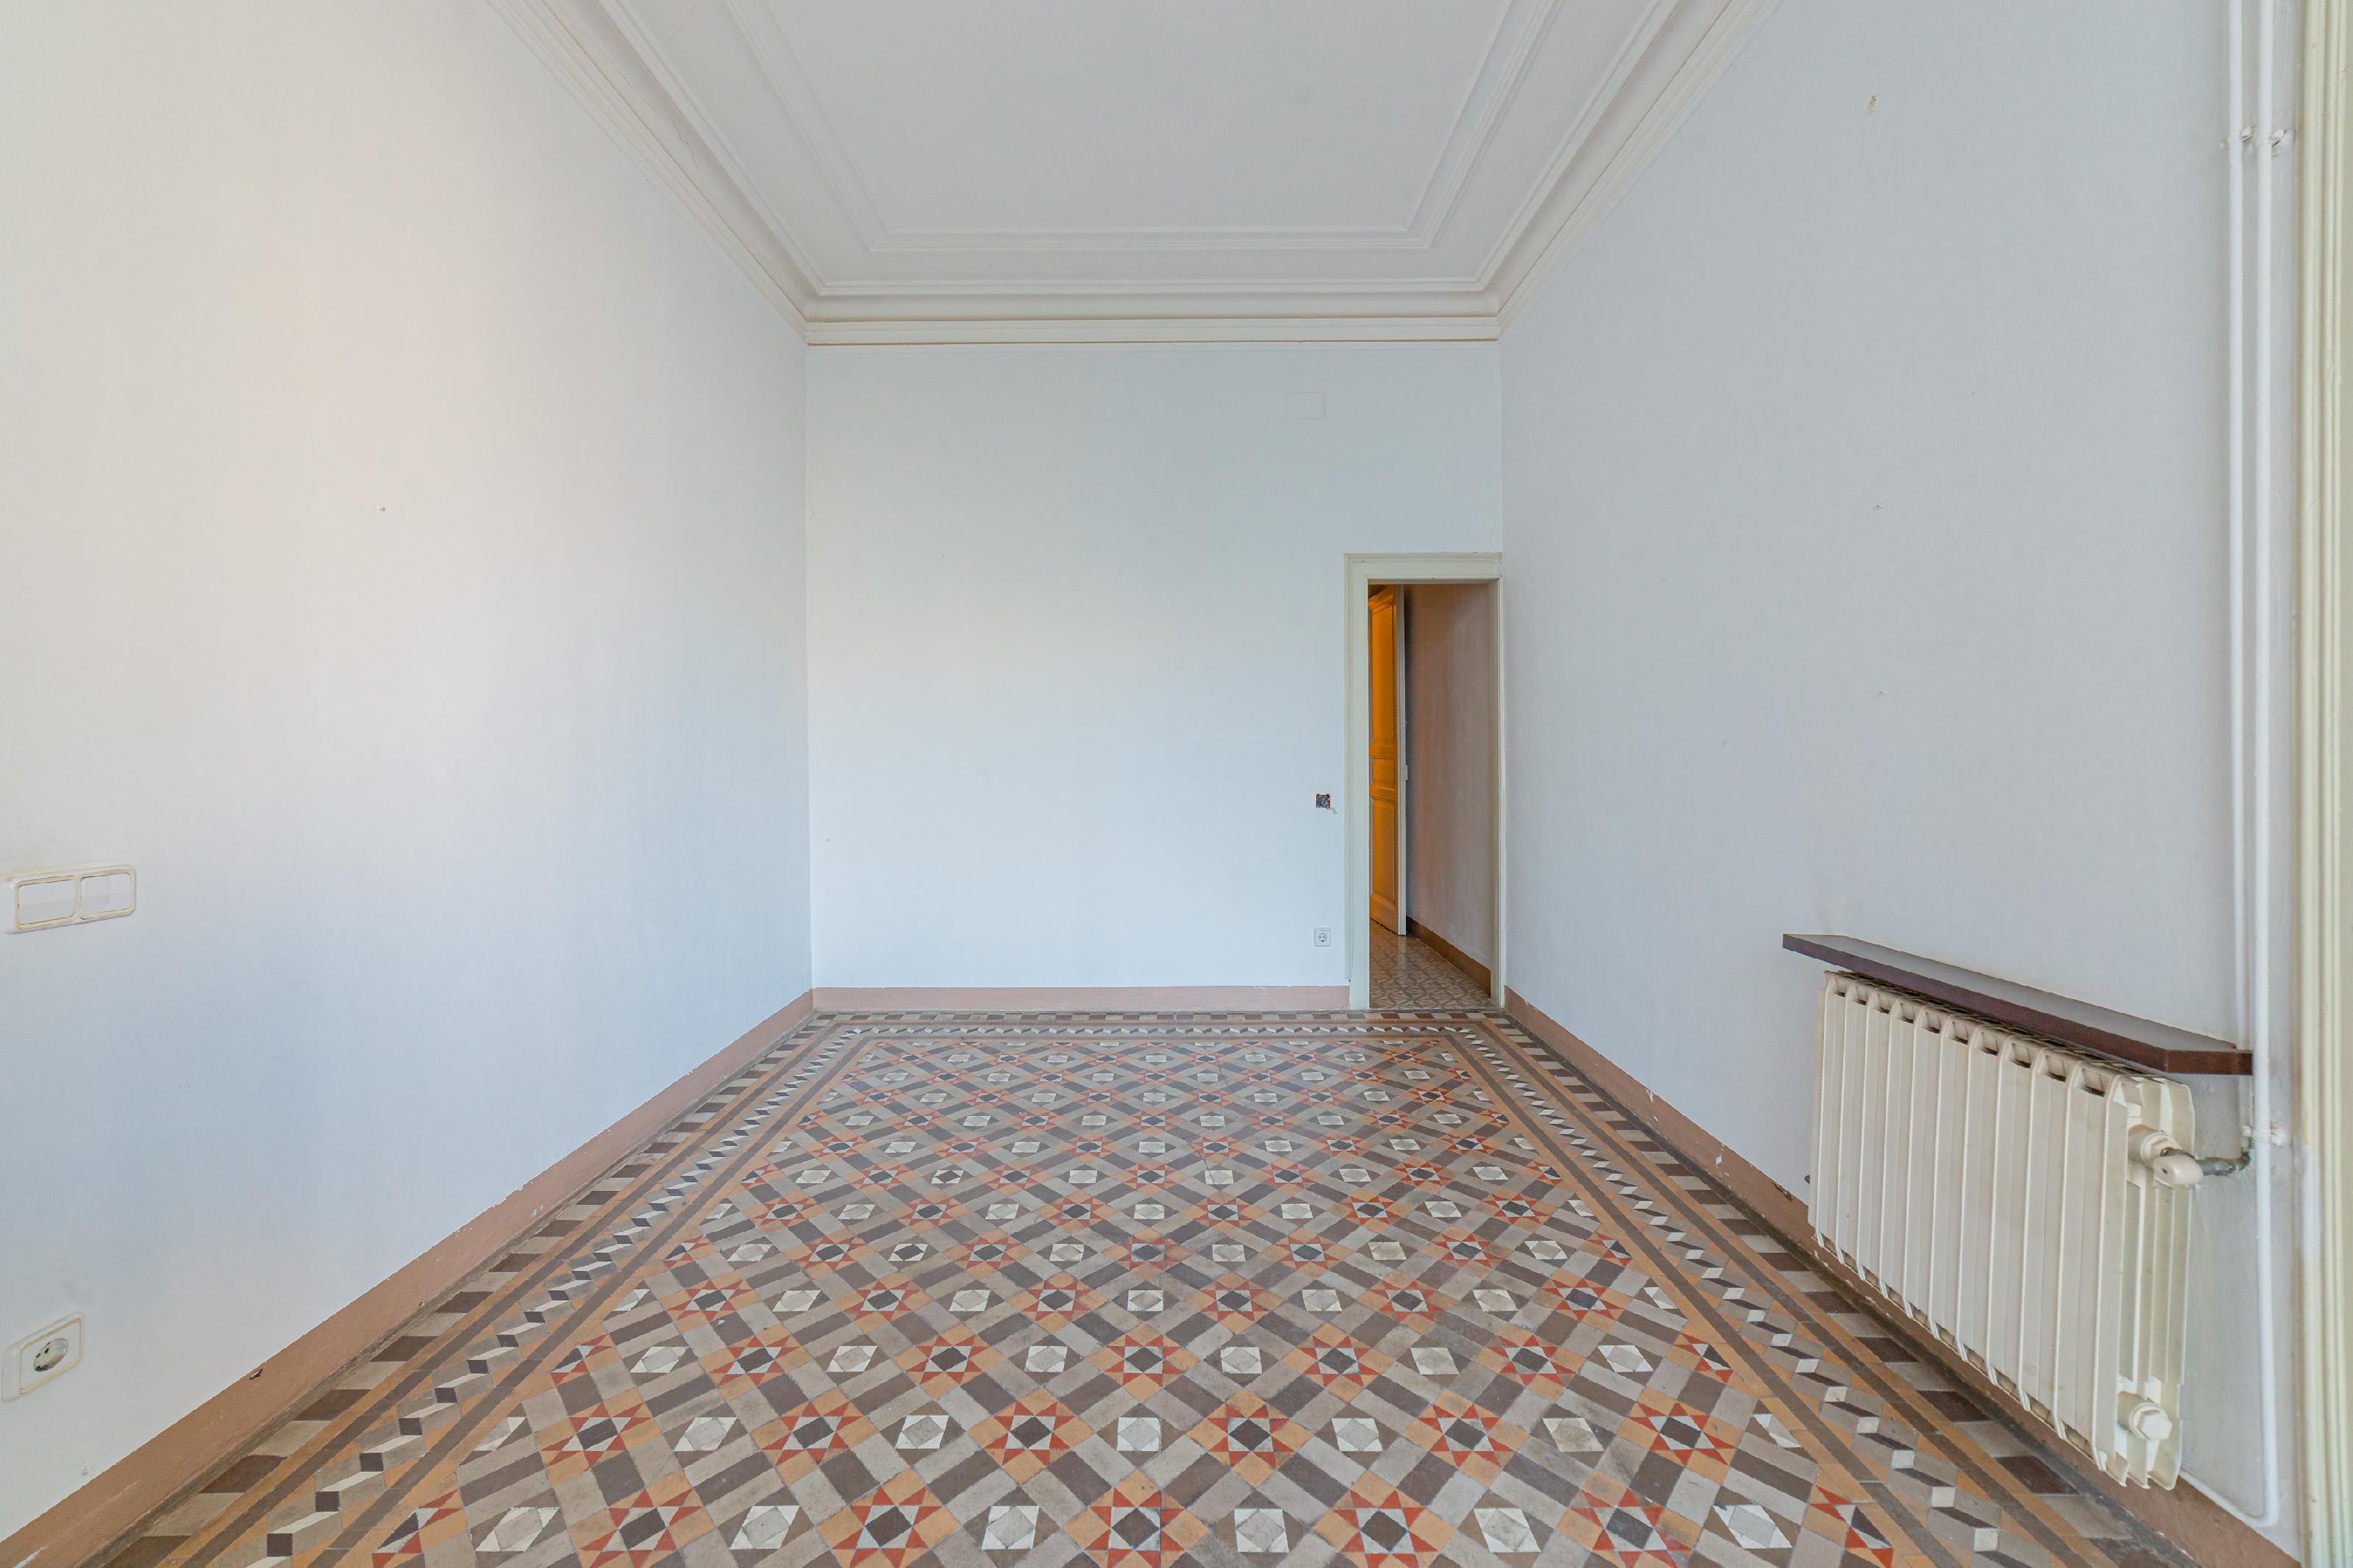 273416 Flat for sale in Eixample, Old Esquerre Eixample 14